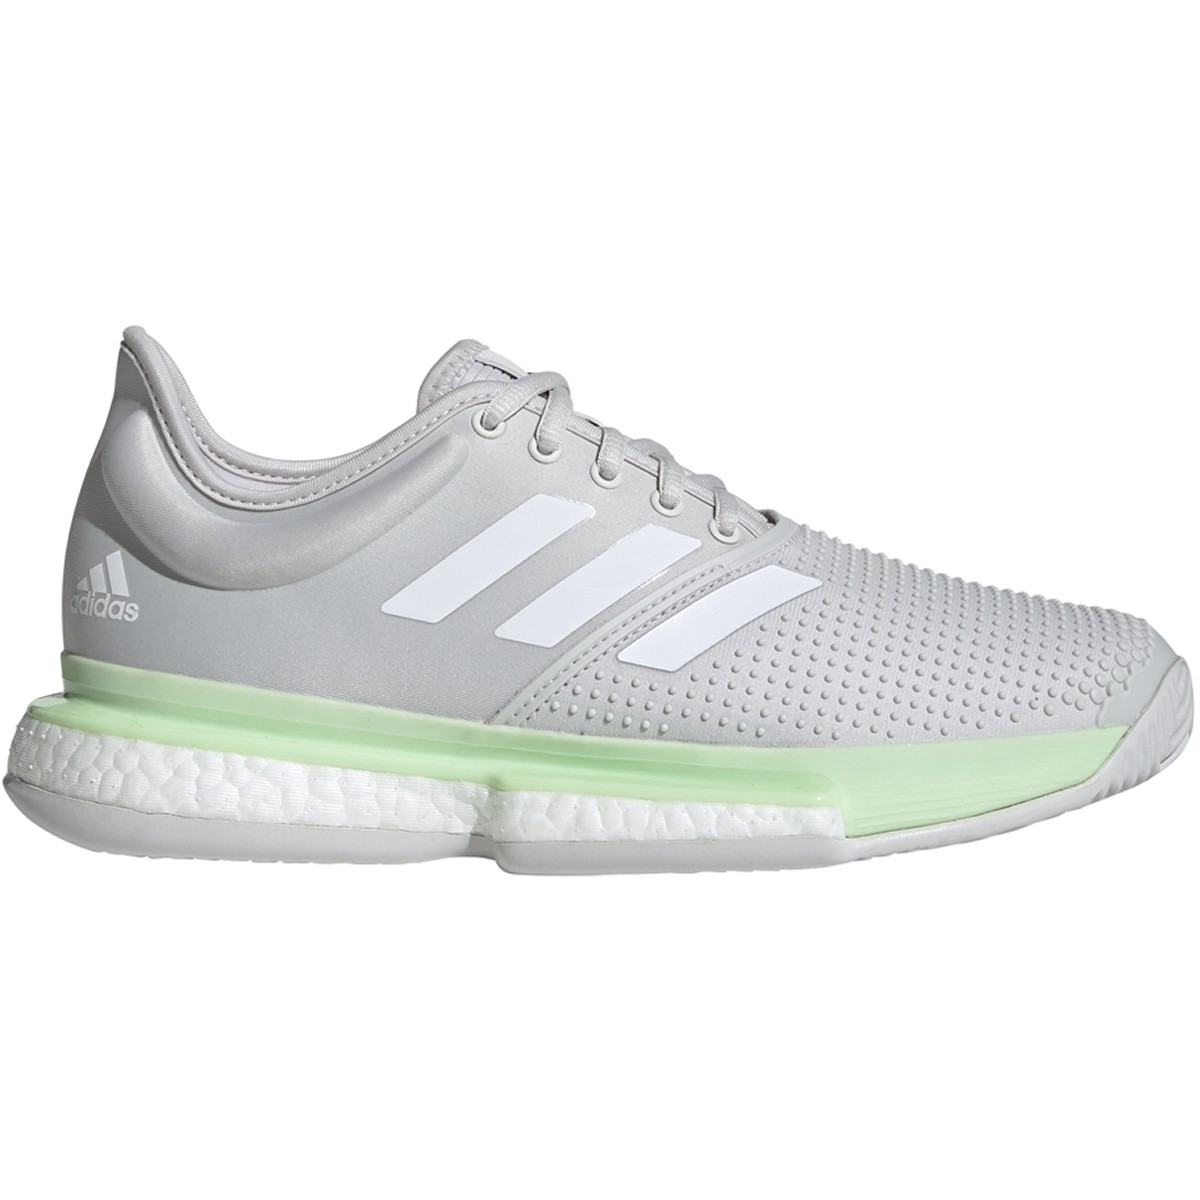 boost tennis shoes